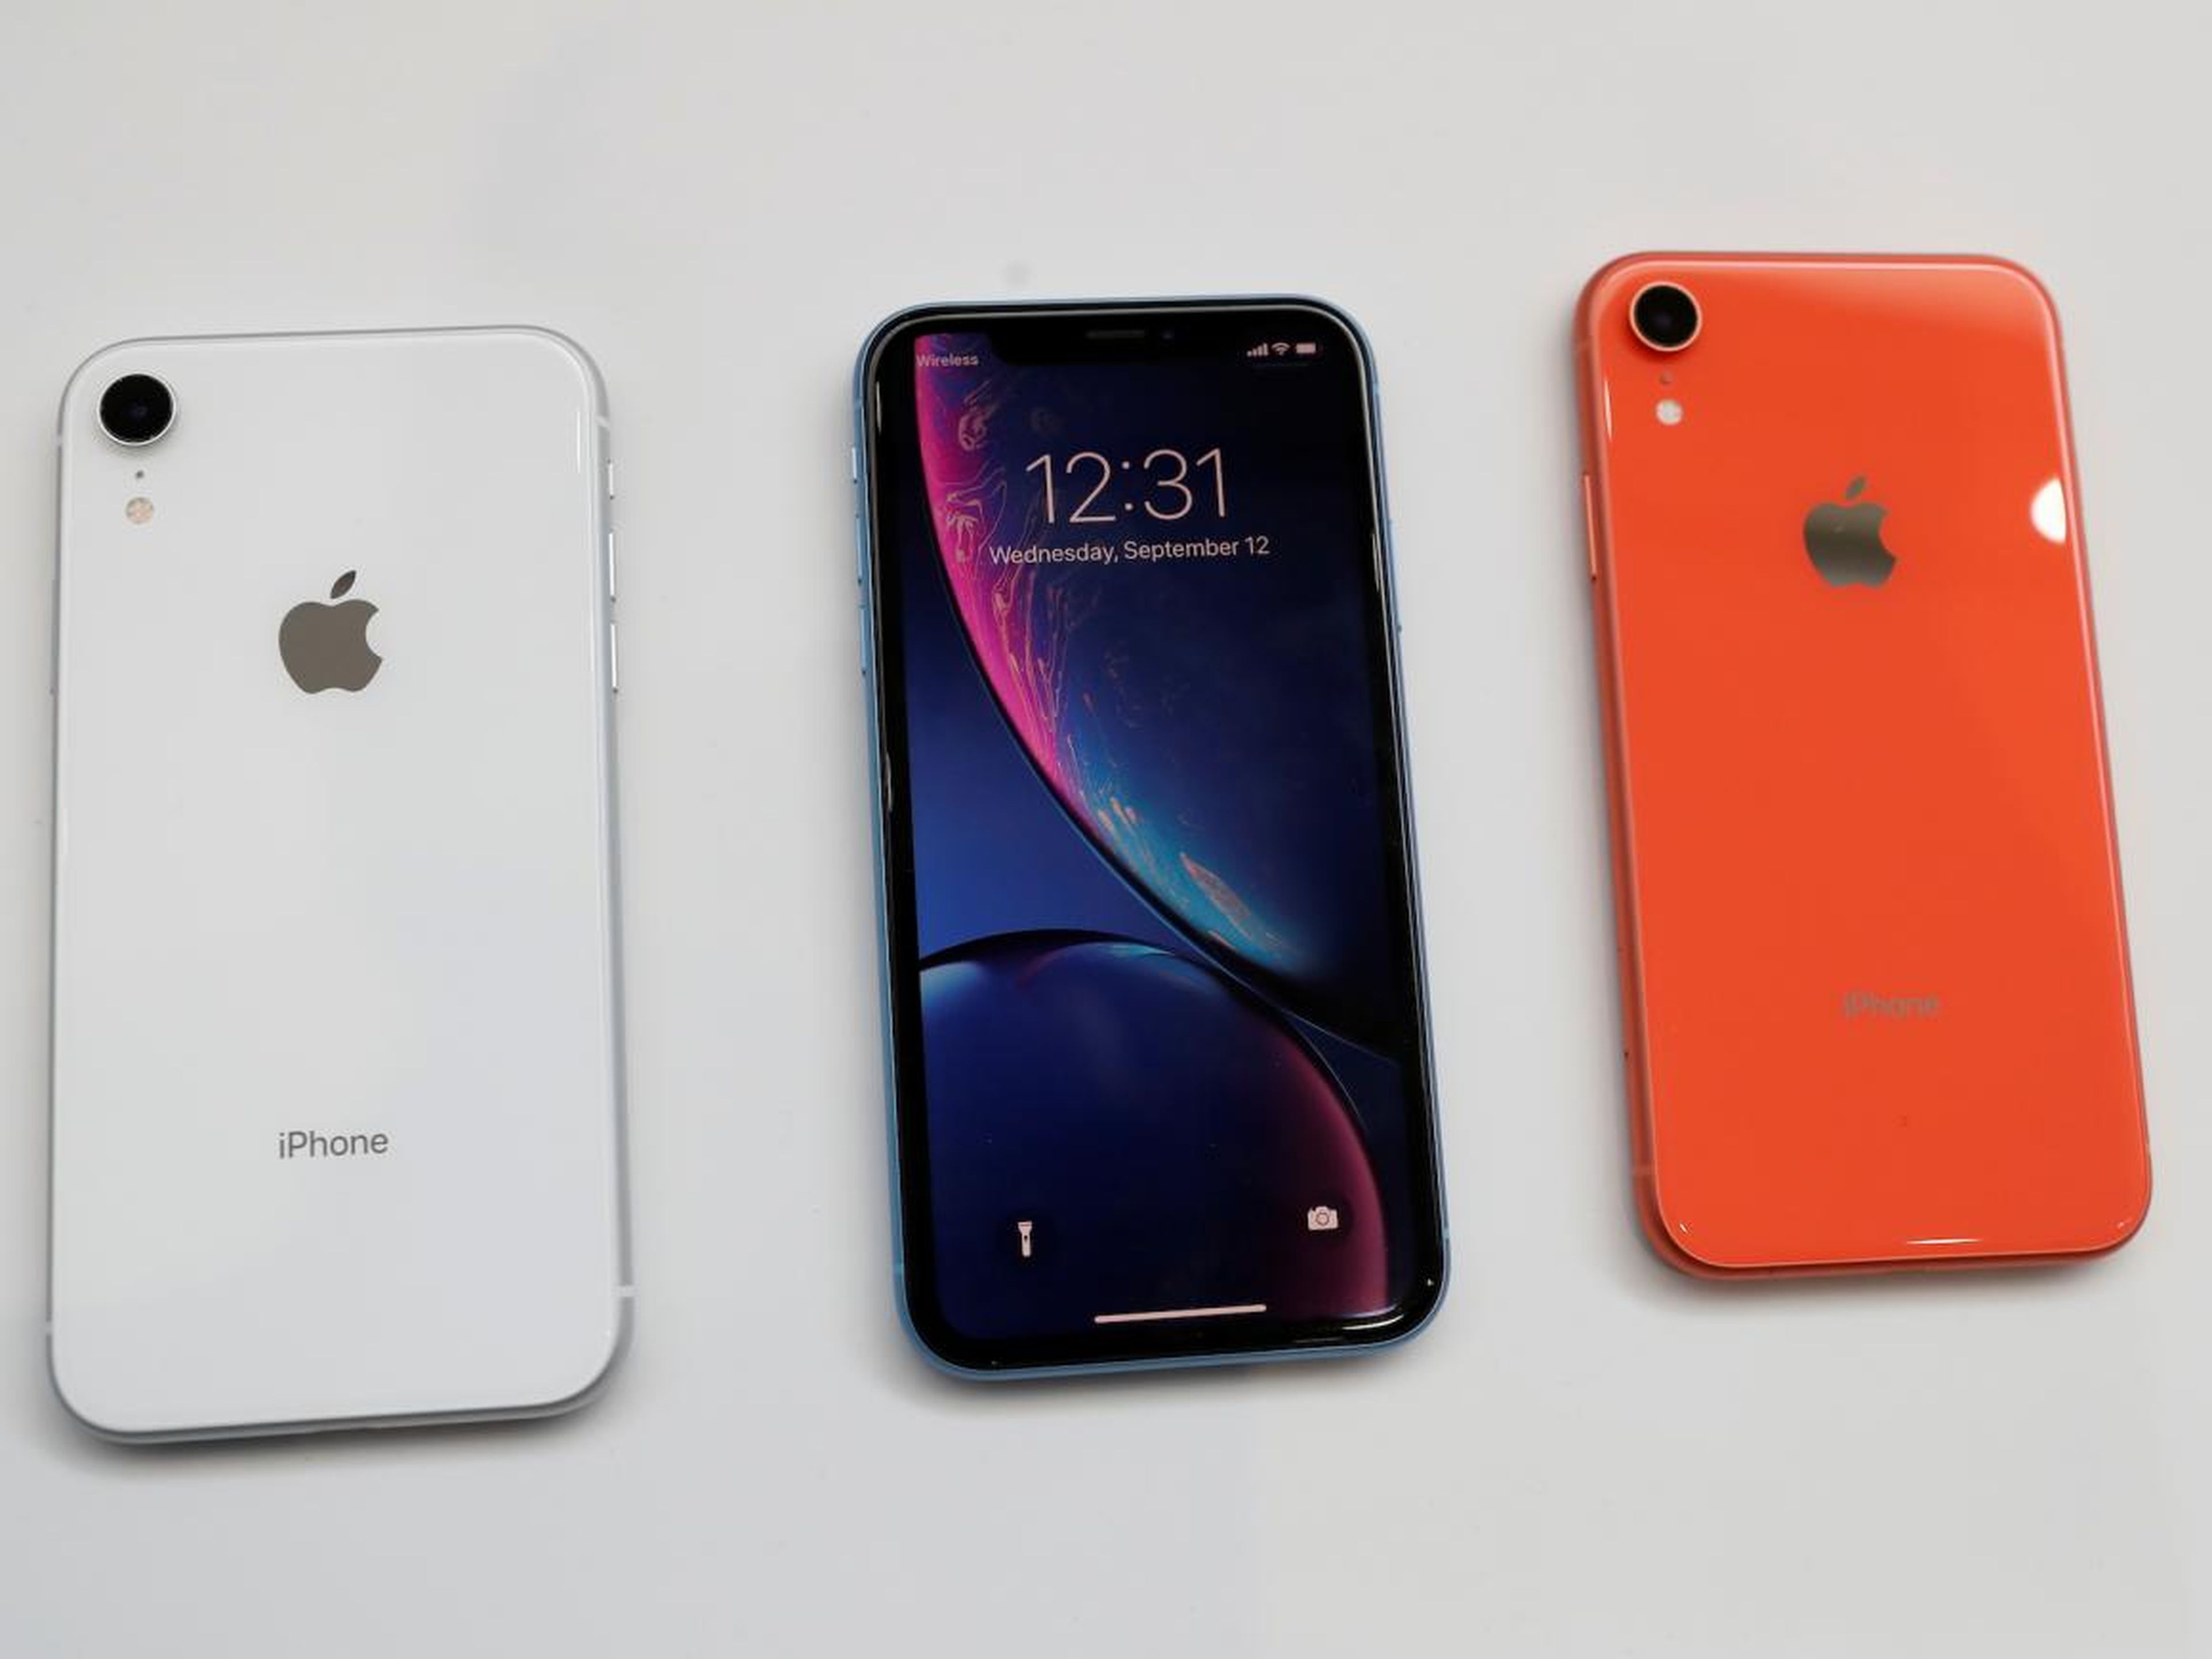 Both the iPhone XR and the Pixel 3 have high-end, single-lens rear cameras.